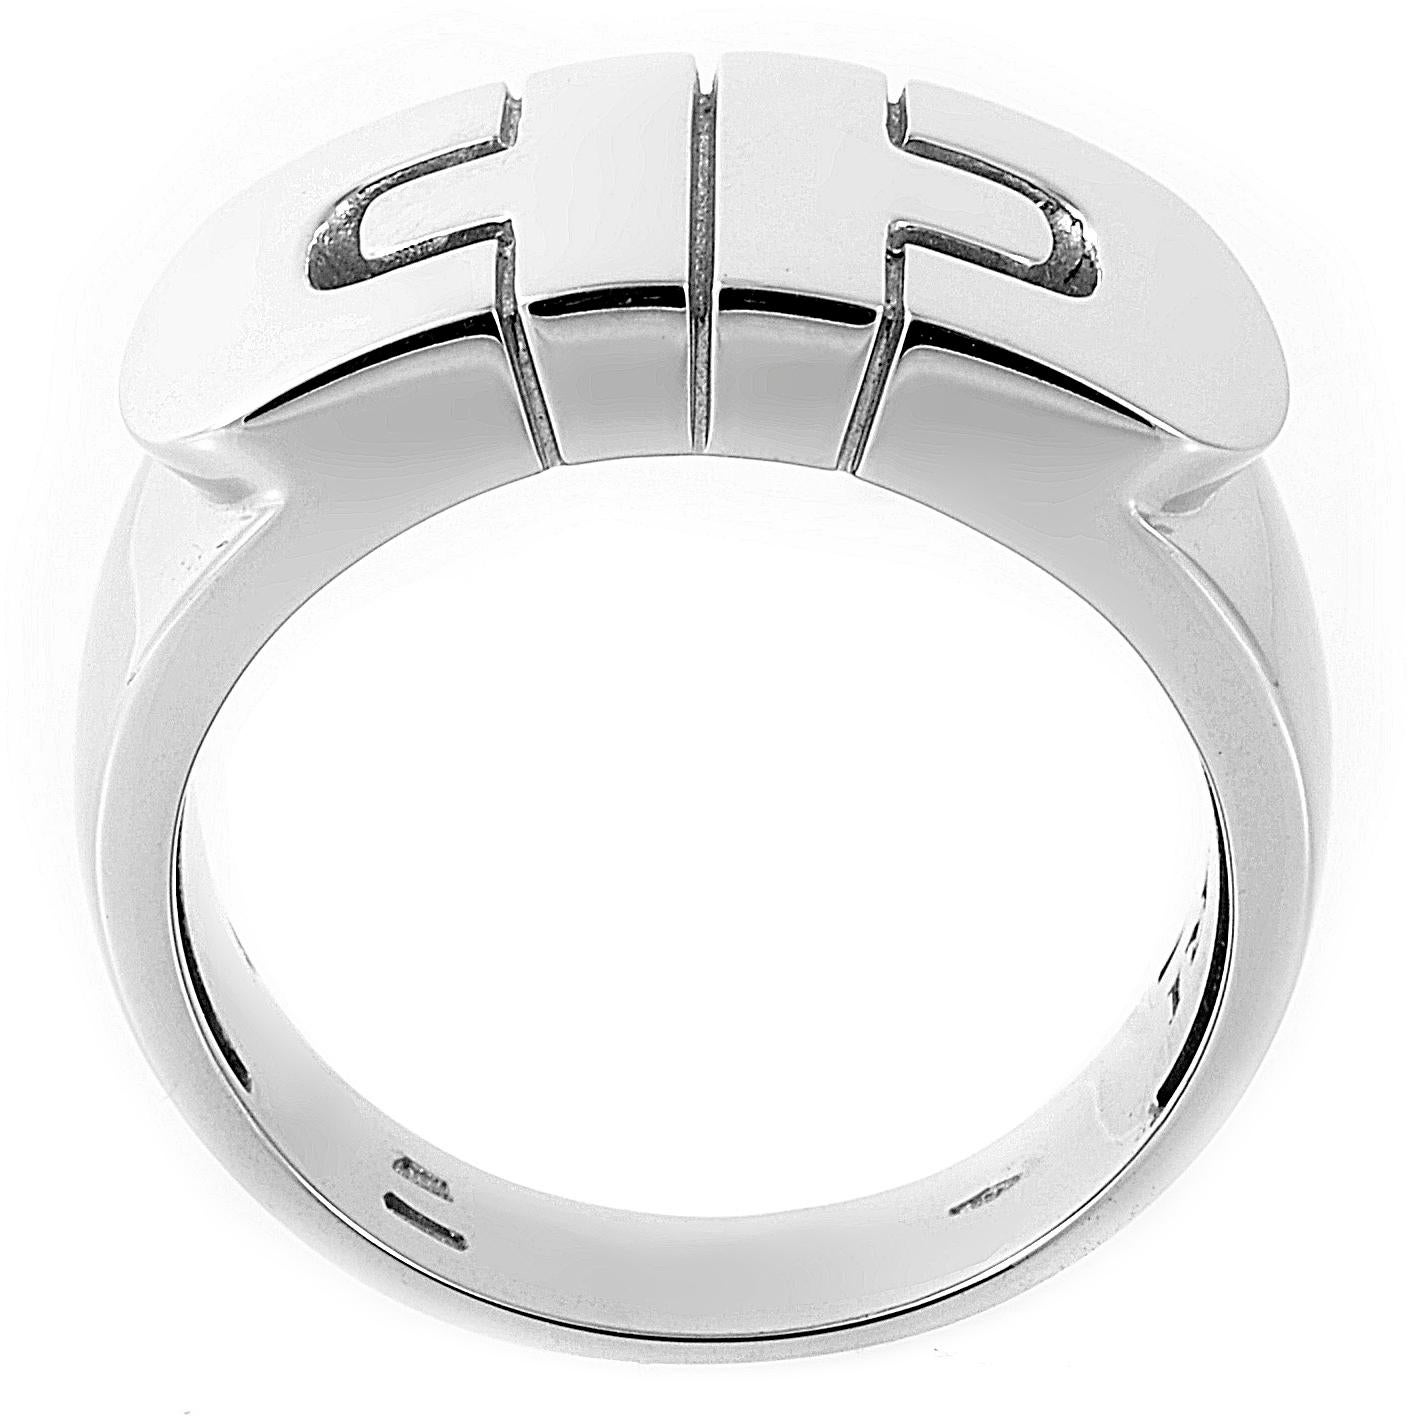 The Parentesi collection is a reinterpretation of one of BVLGARI's most renowned iconic designs, taking inspiration from a typical Roman architectural pattern. This Parentesi ring is made of 18K white gold and features the Parentesi design.
